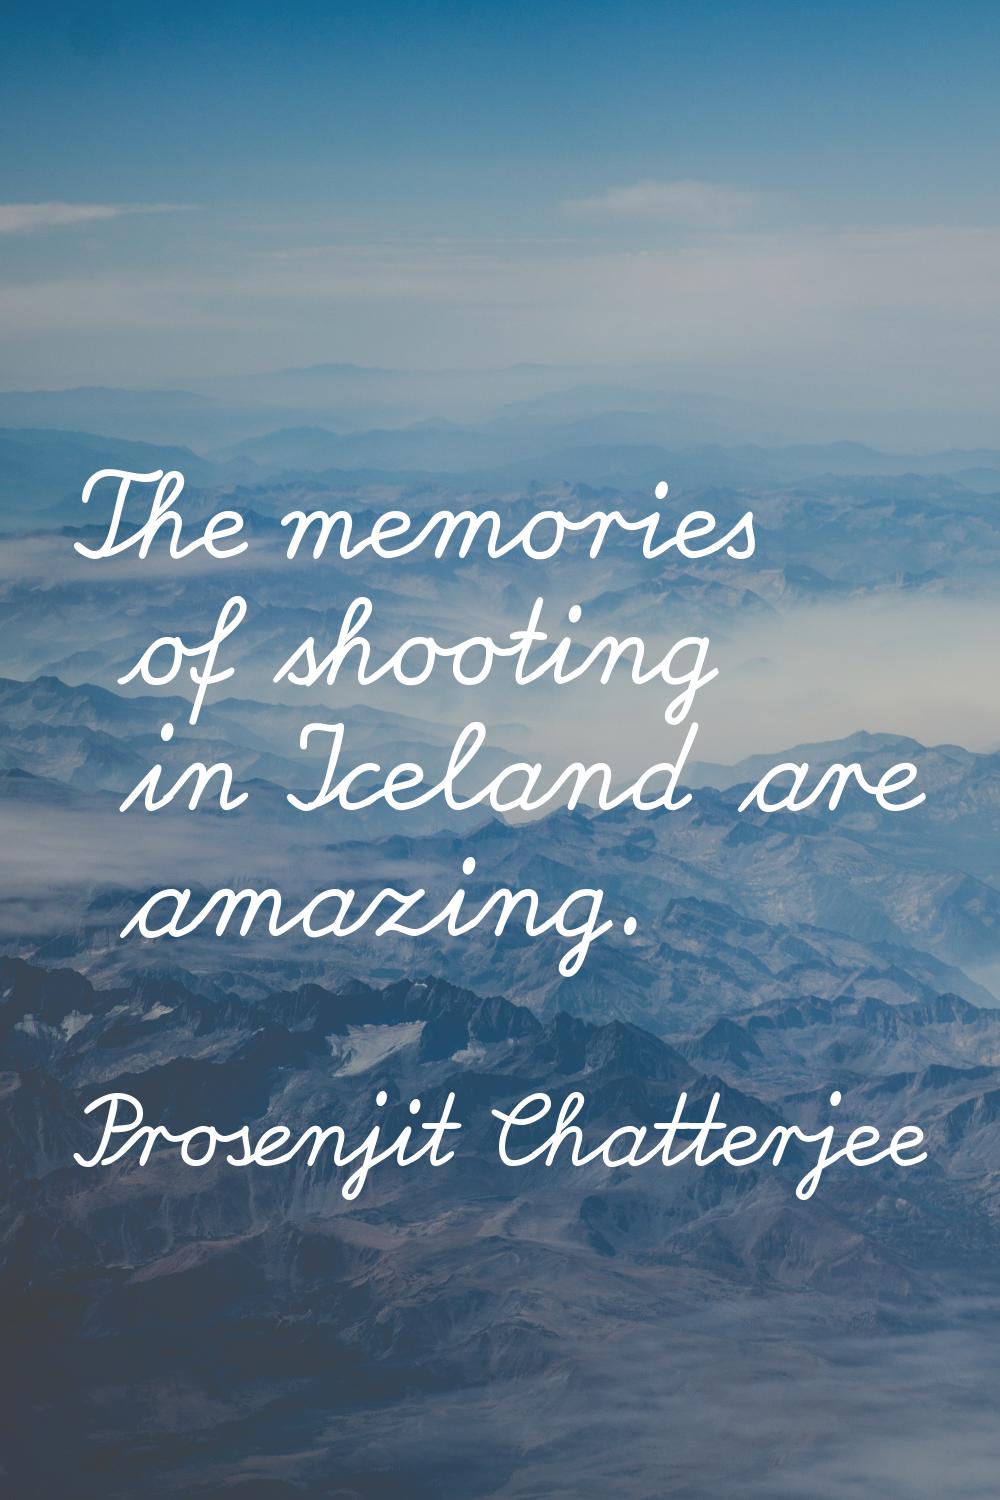 The memories of shooting in Iceland are amazing.